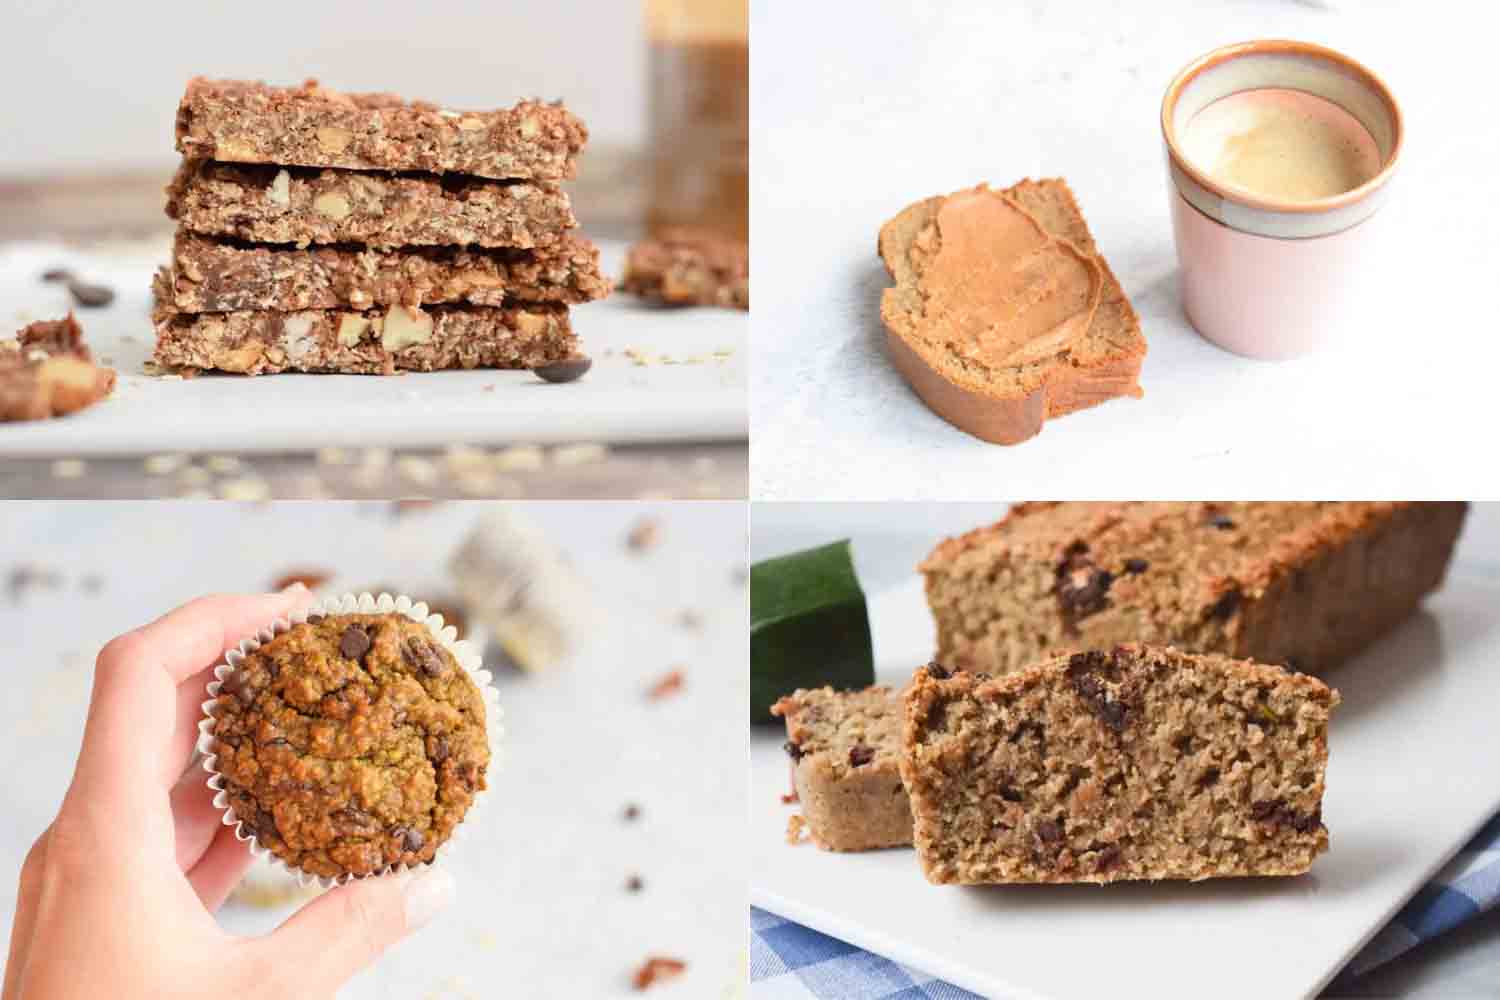 Four low FODMAP snacks that you can bake yourself together in one picture